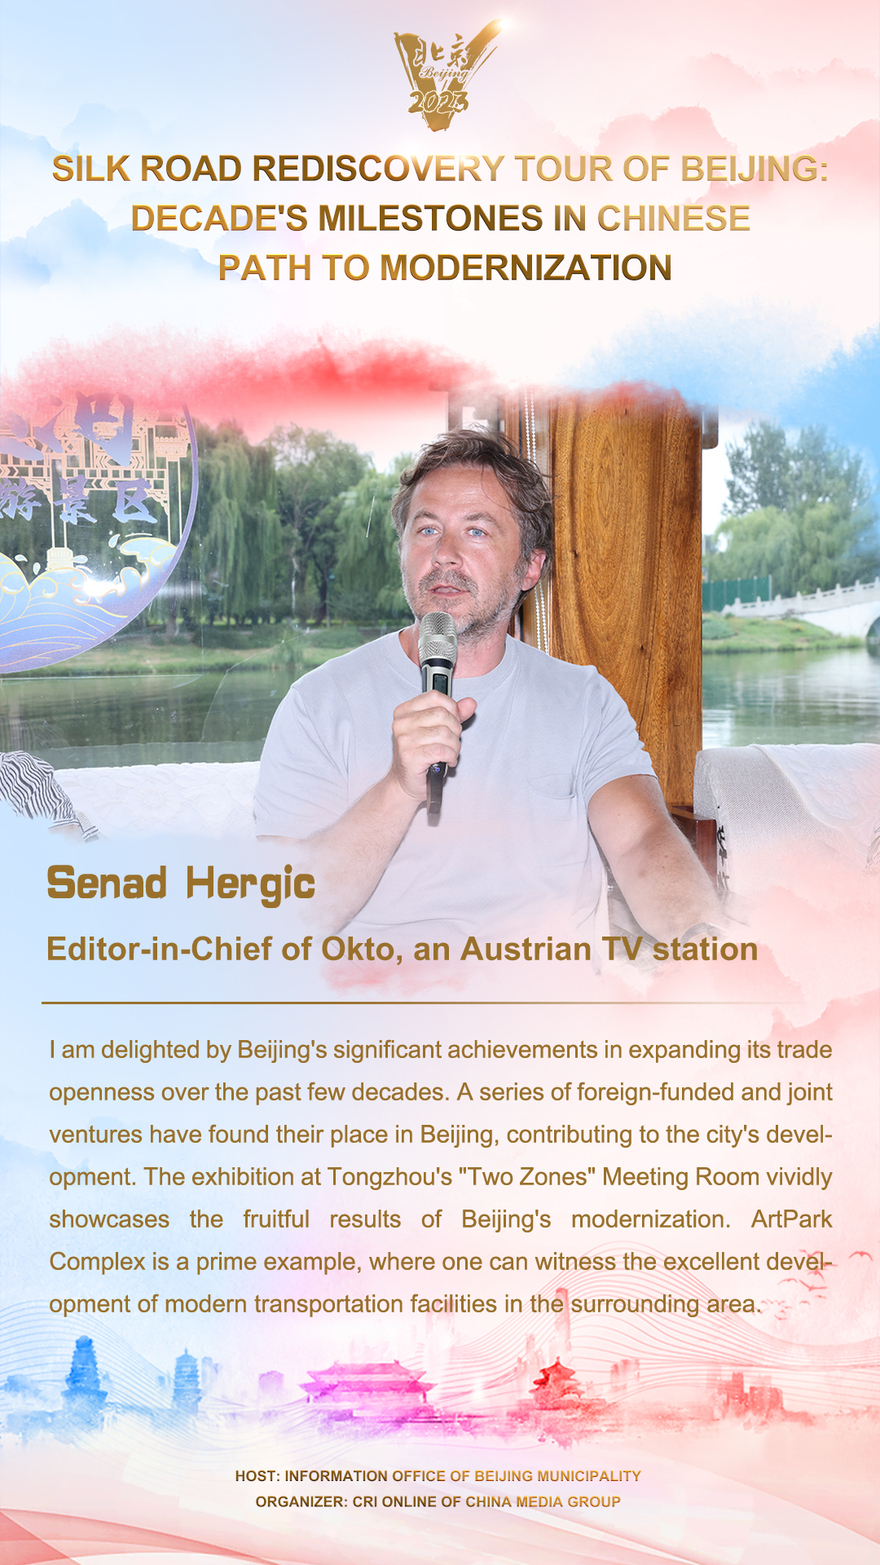 Senad Hergic: I am delighted by Beijing's significant achievements in expanding its trade openness over the past few decades_fororder_2